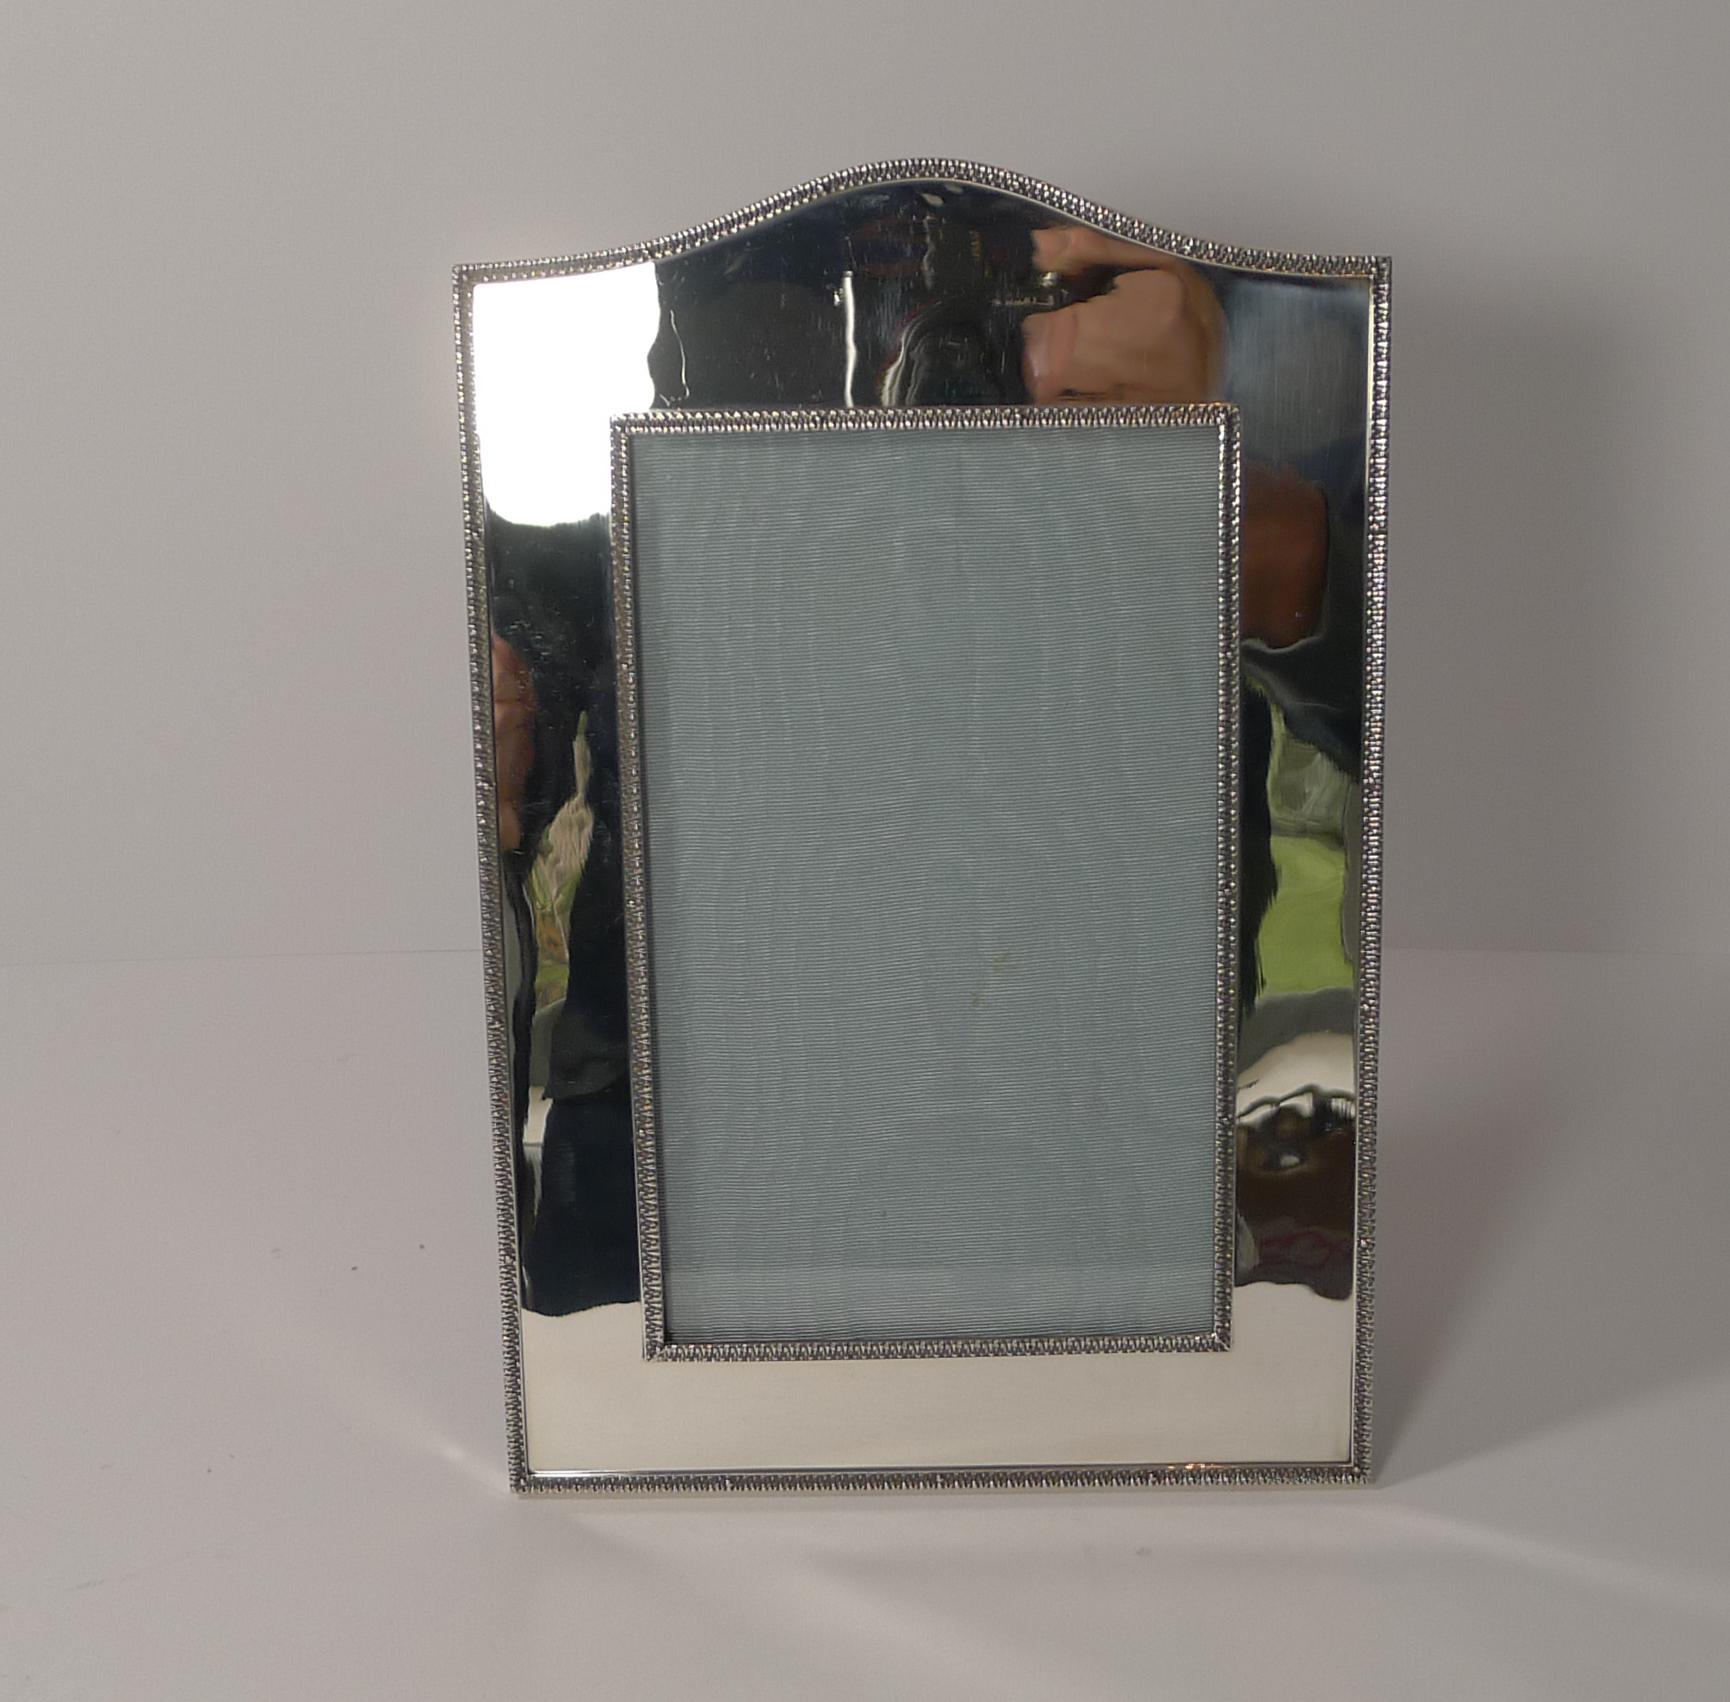 Edwardian Top Notch Large English Sterling Silver Photograph or Picture Frame, 1910